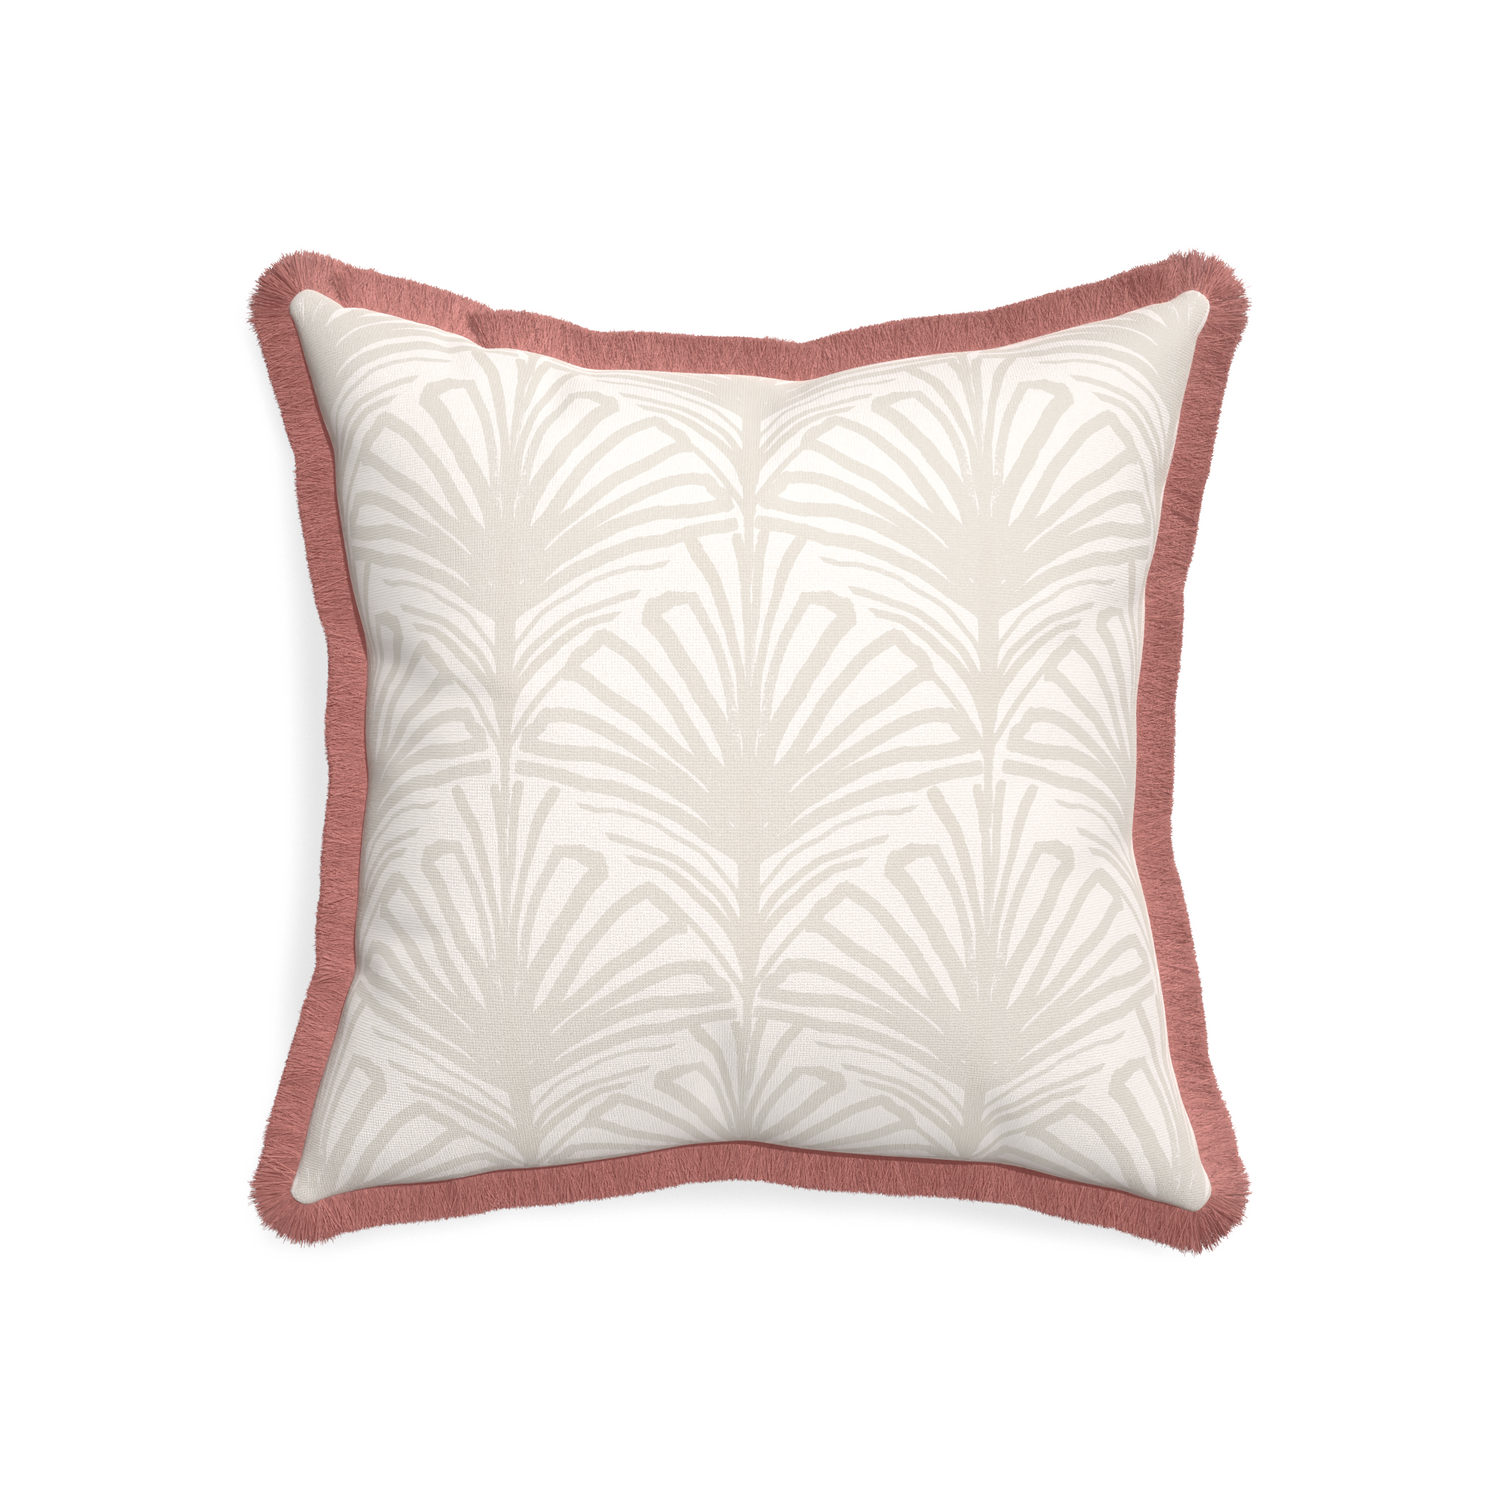 20-square suzy sand custom pillow with d fringe on white background